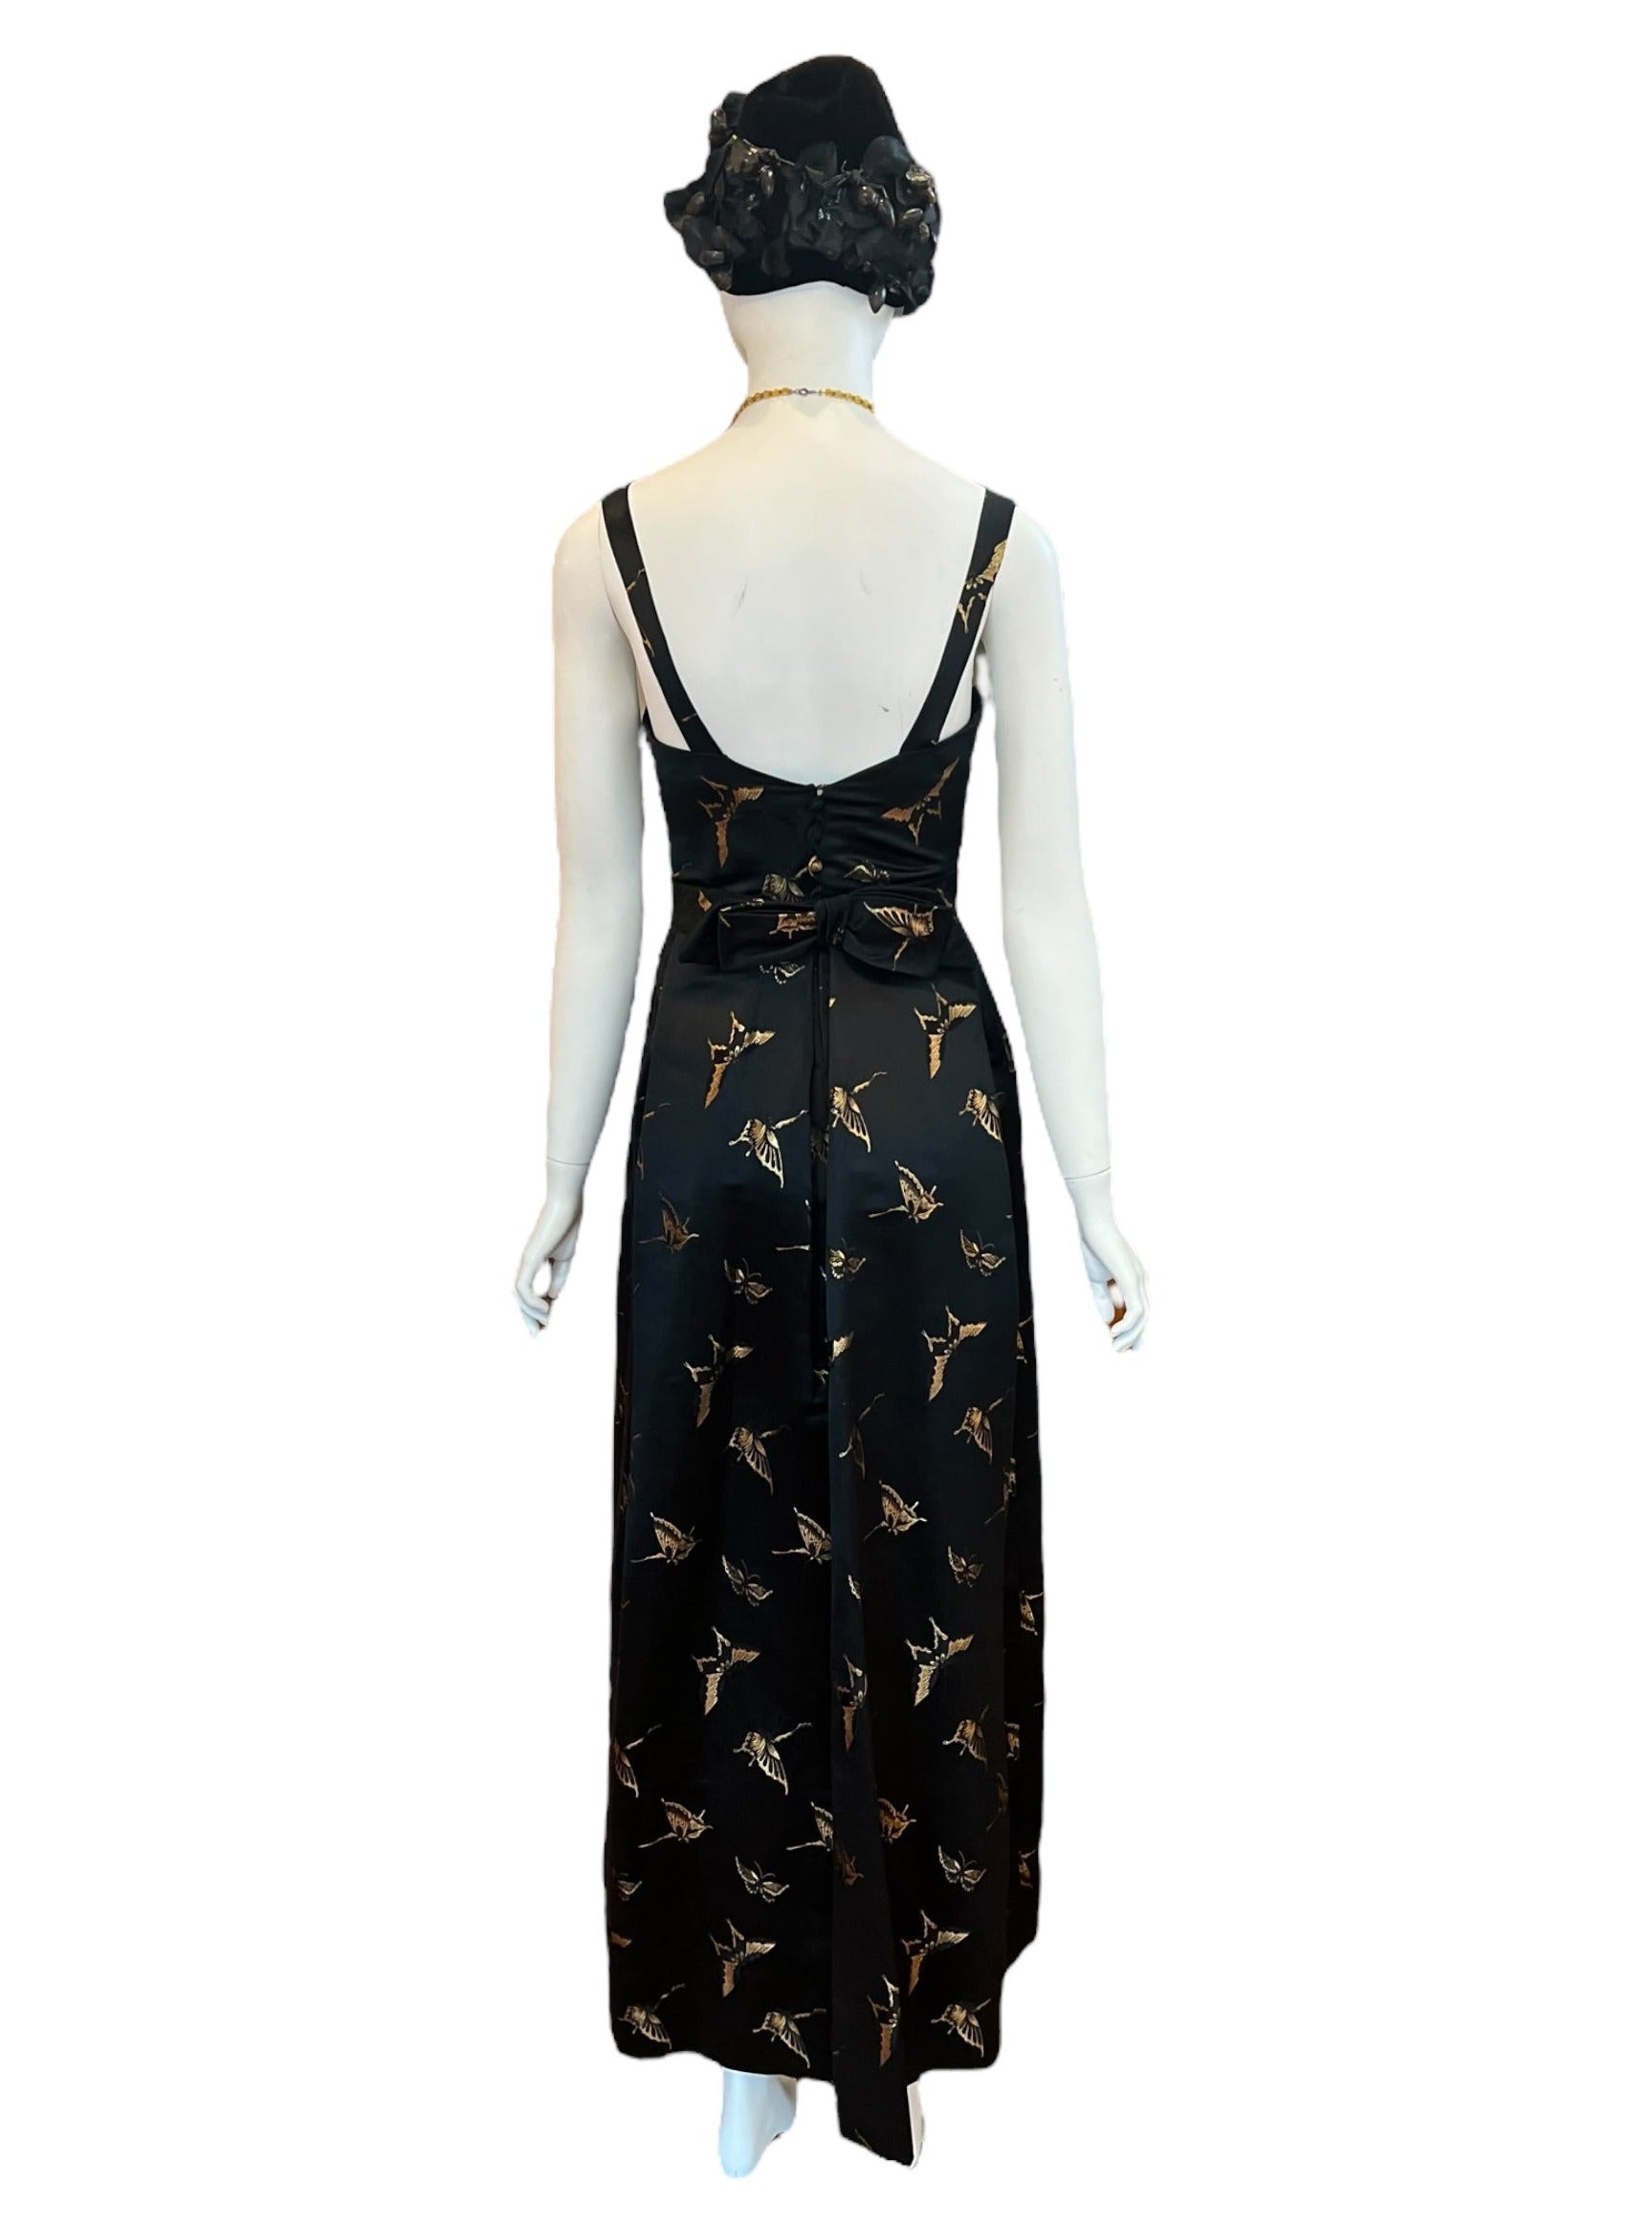 One of a kind 1950's gown with gold butterflies, thick silk material, button closure with a bow accent and shawl with oversized flower - insane vintage piece